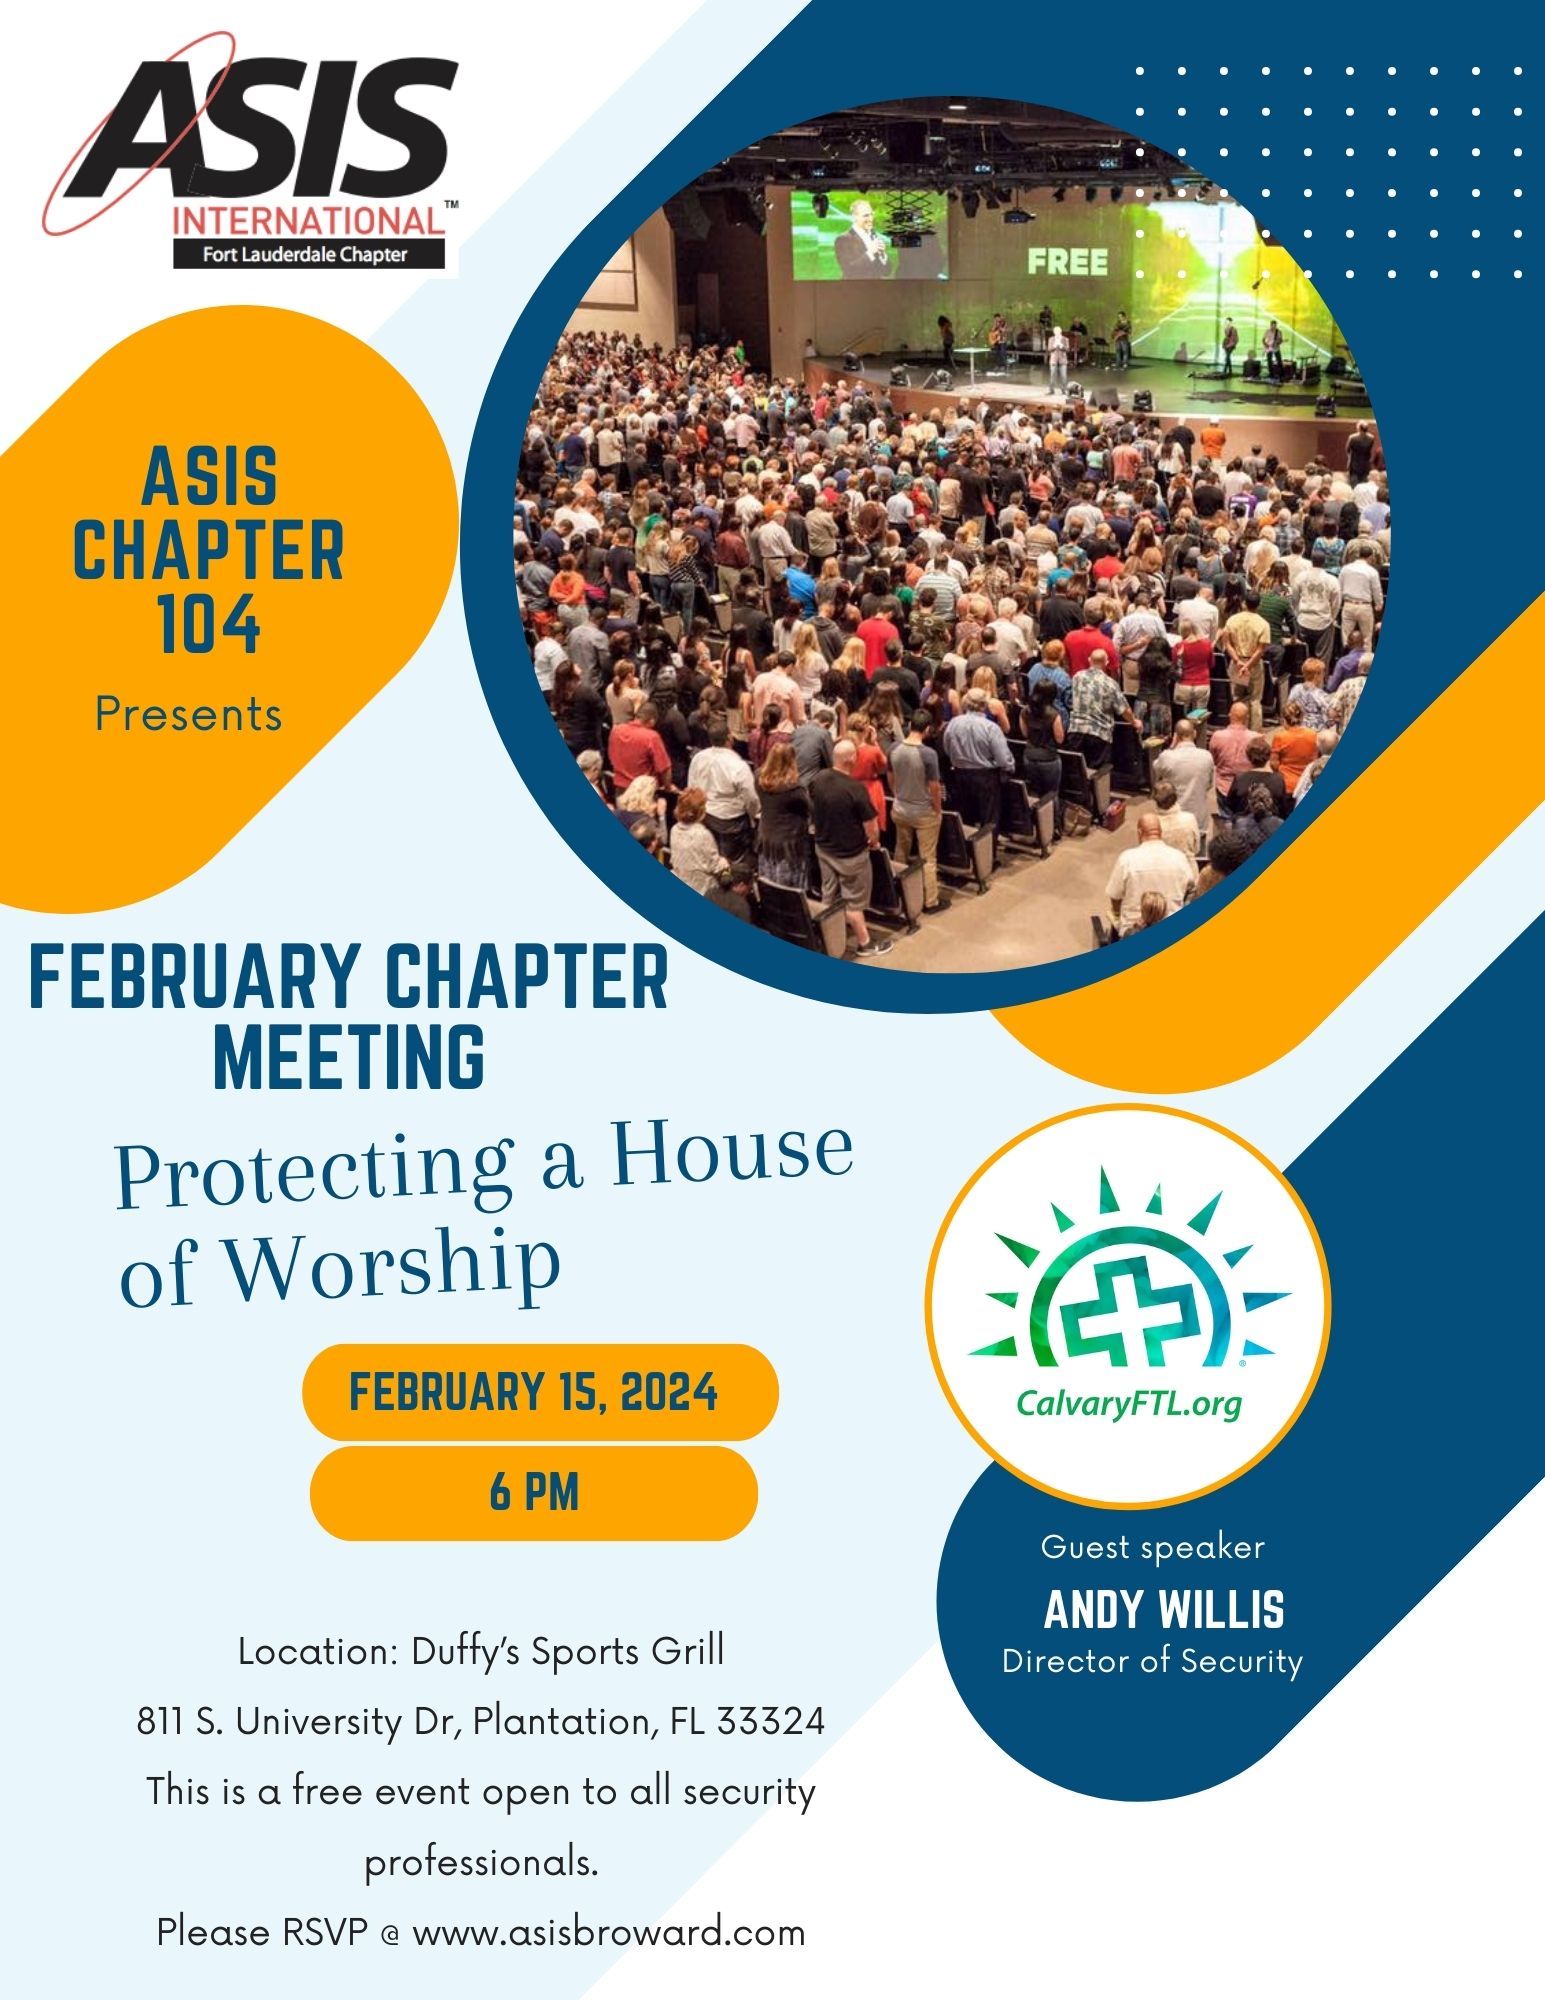 A promotional flyer for the ASIS Chapter 104 February Chapter Meeting, with a large crowd in a conference setting, text detailing the event on 'Protecting a House of Worship' on February 15, 2024, at 6 PM, and logos of ASIS International and CalvaryFTL.org.